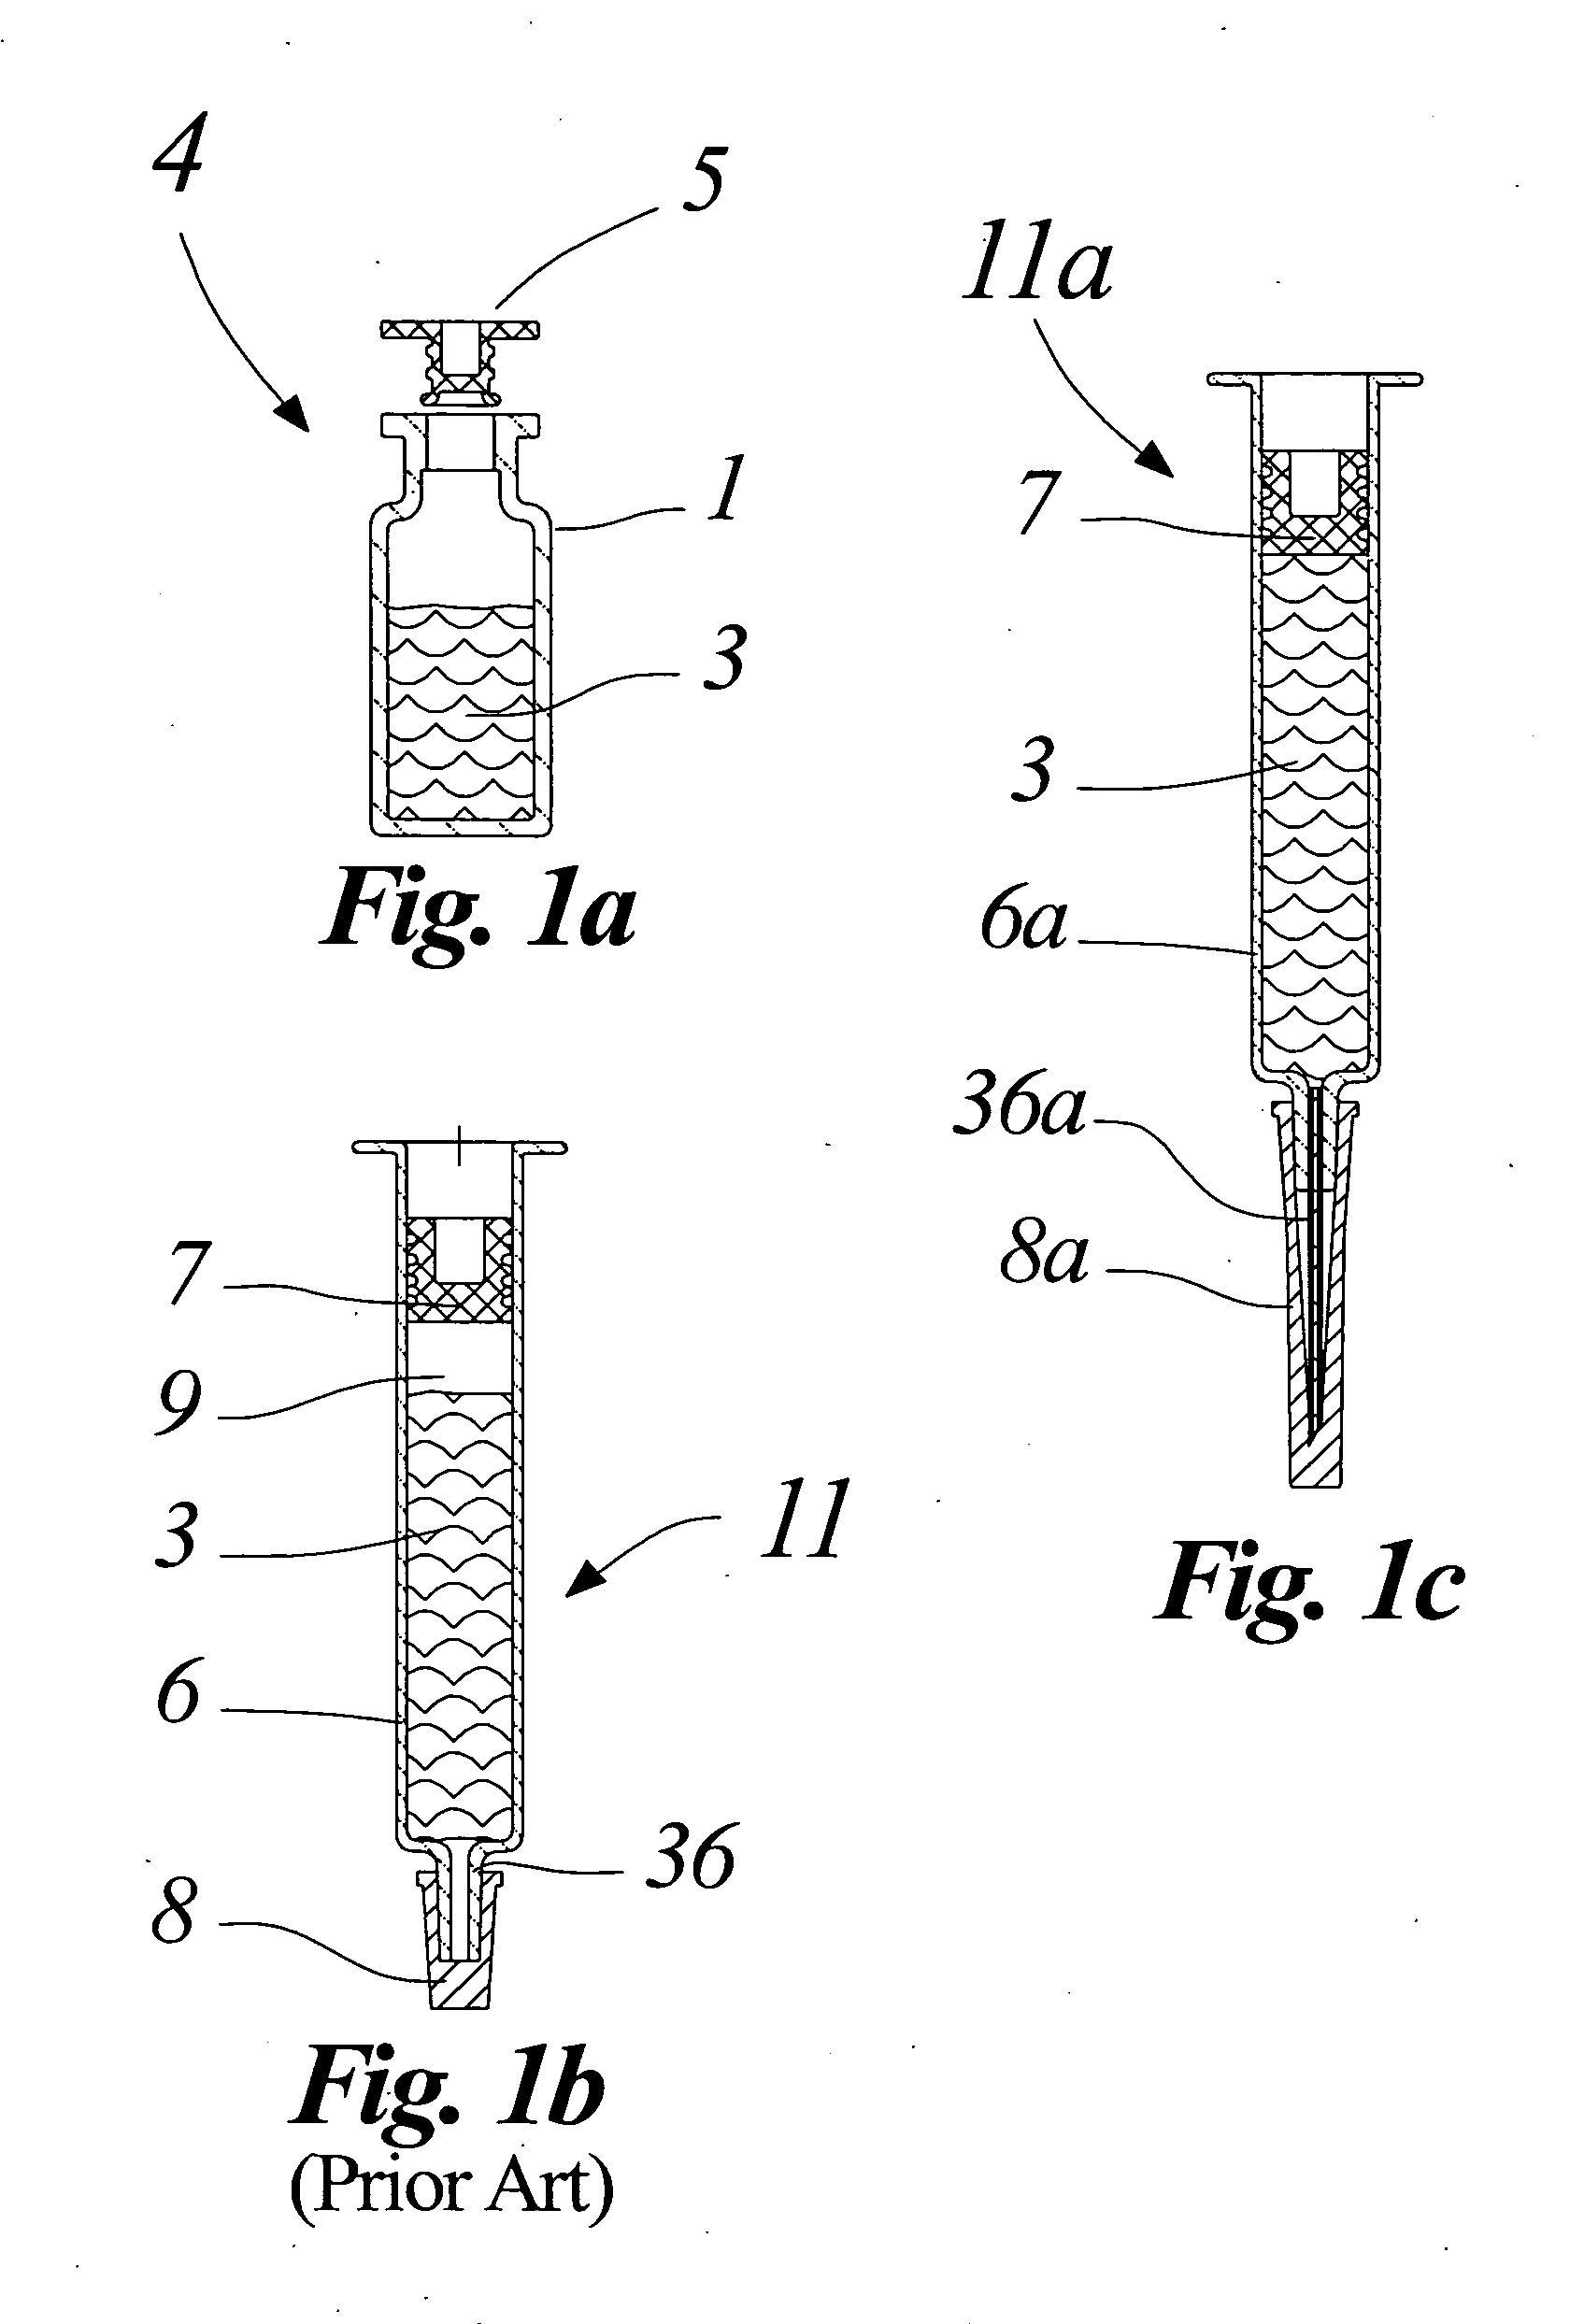 System and method for filling containers with liquid under varying pressure conditions